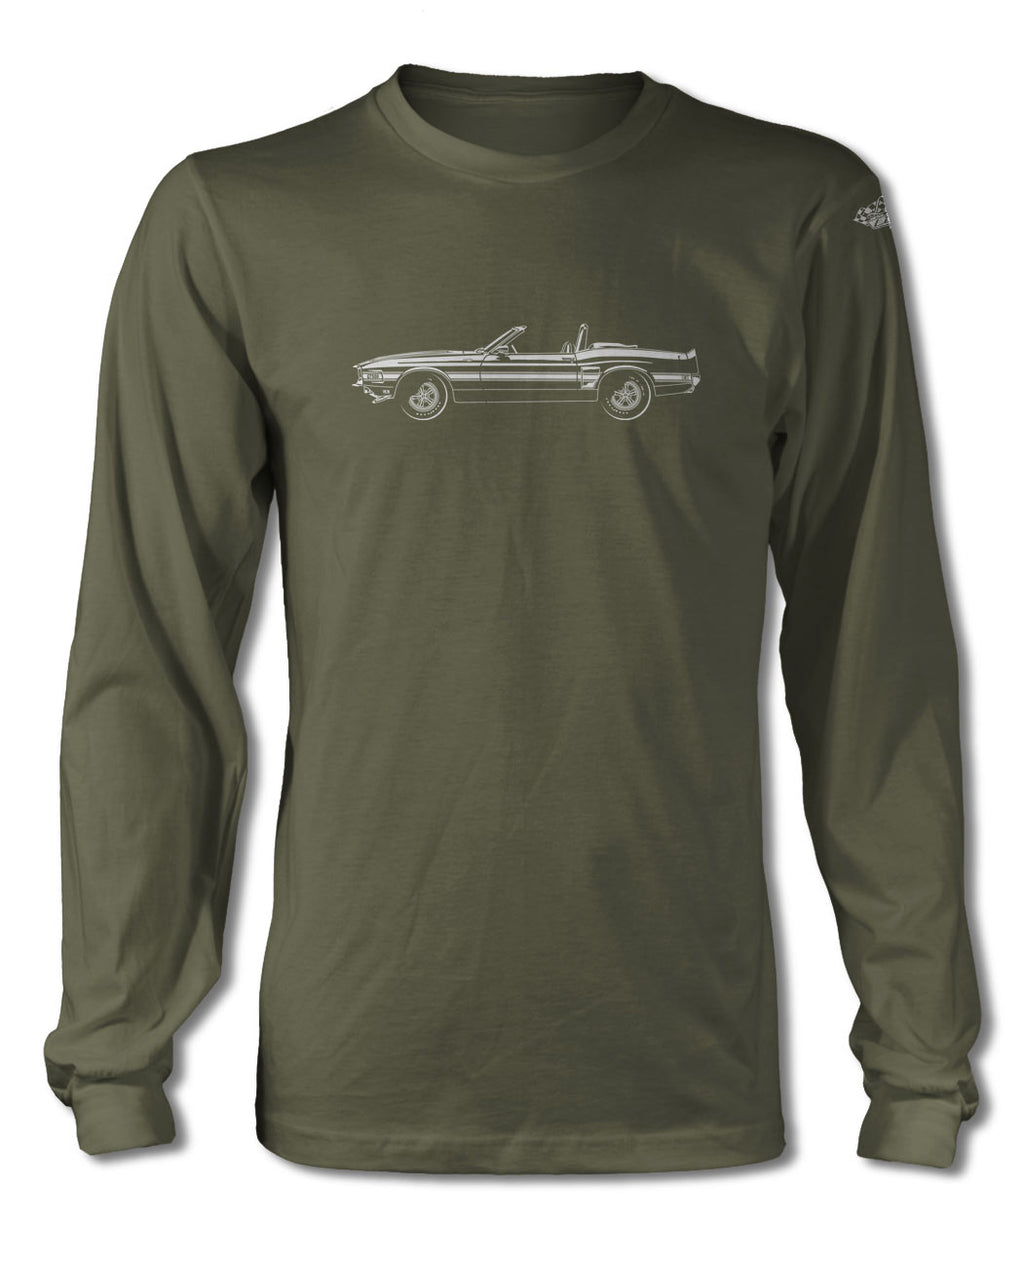 1969 Ford Mustang Shelby GT500 Convertible T-Shirt - Long Sleeves - Side View